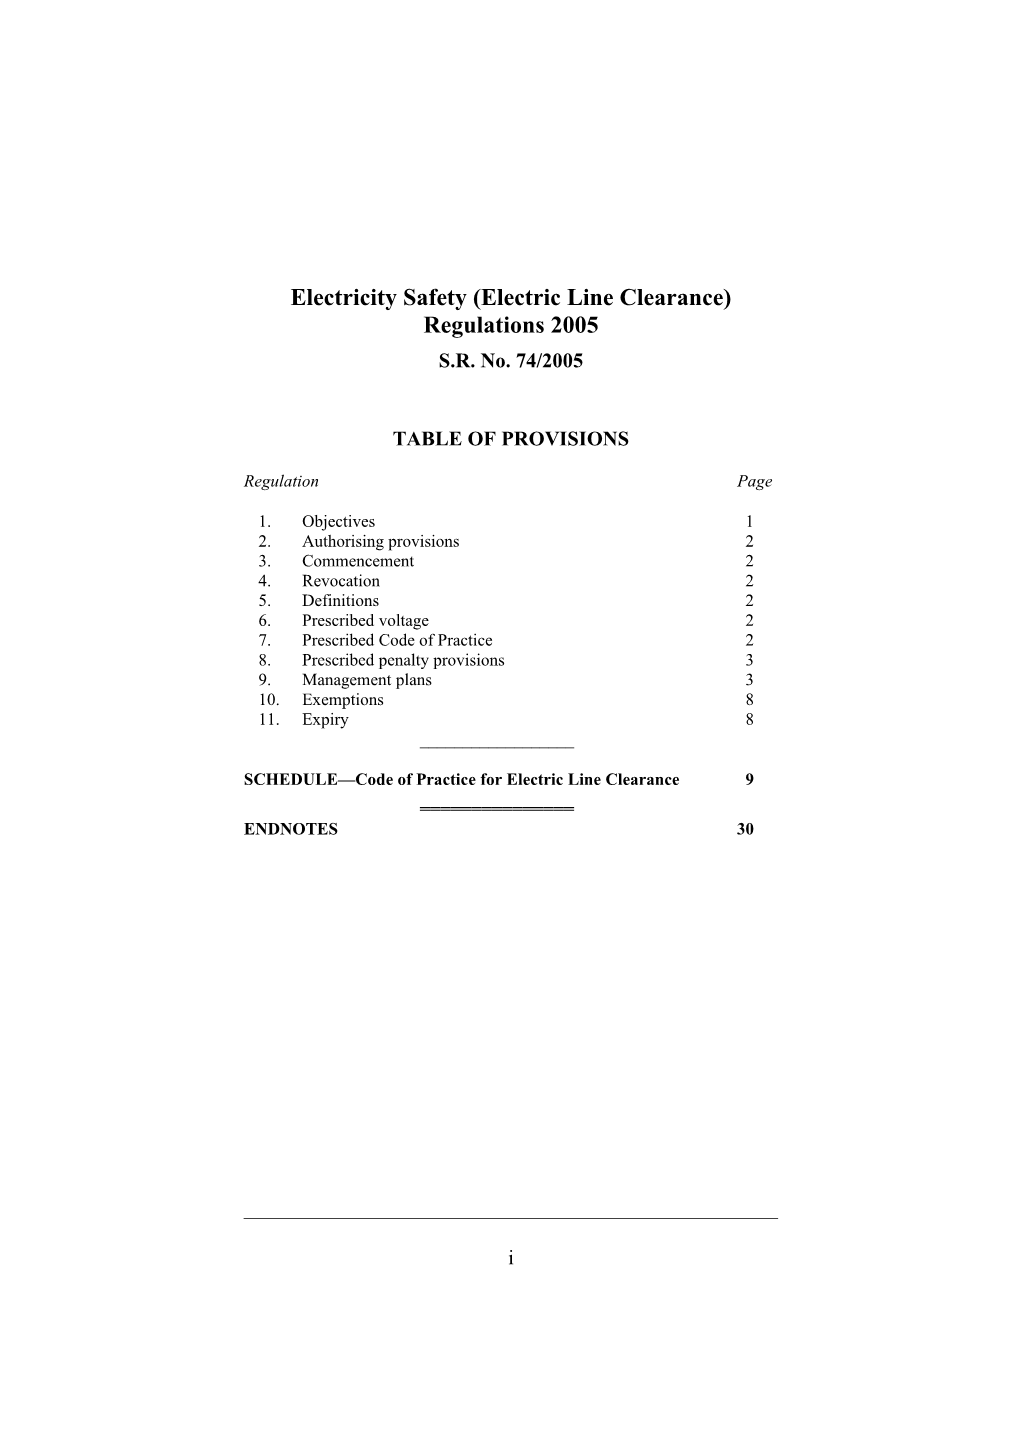 Electricity Safety (Electric Line Clearance) Regulations 2005